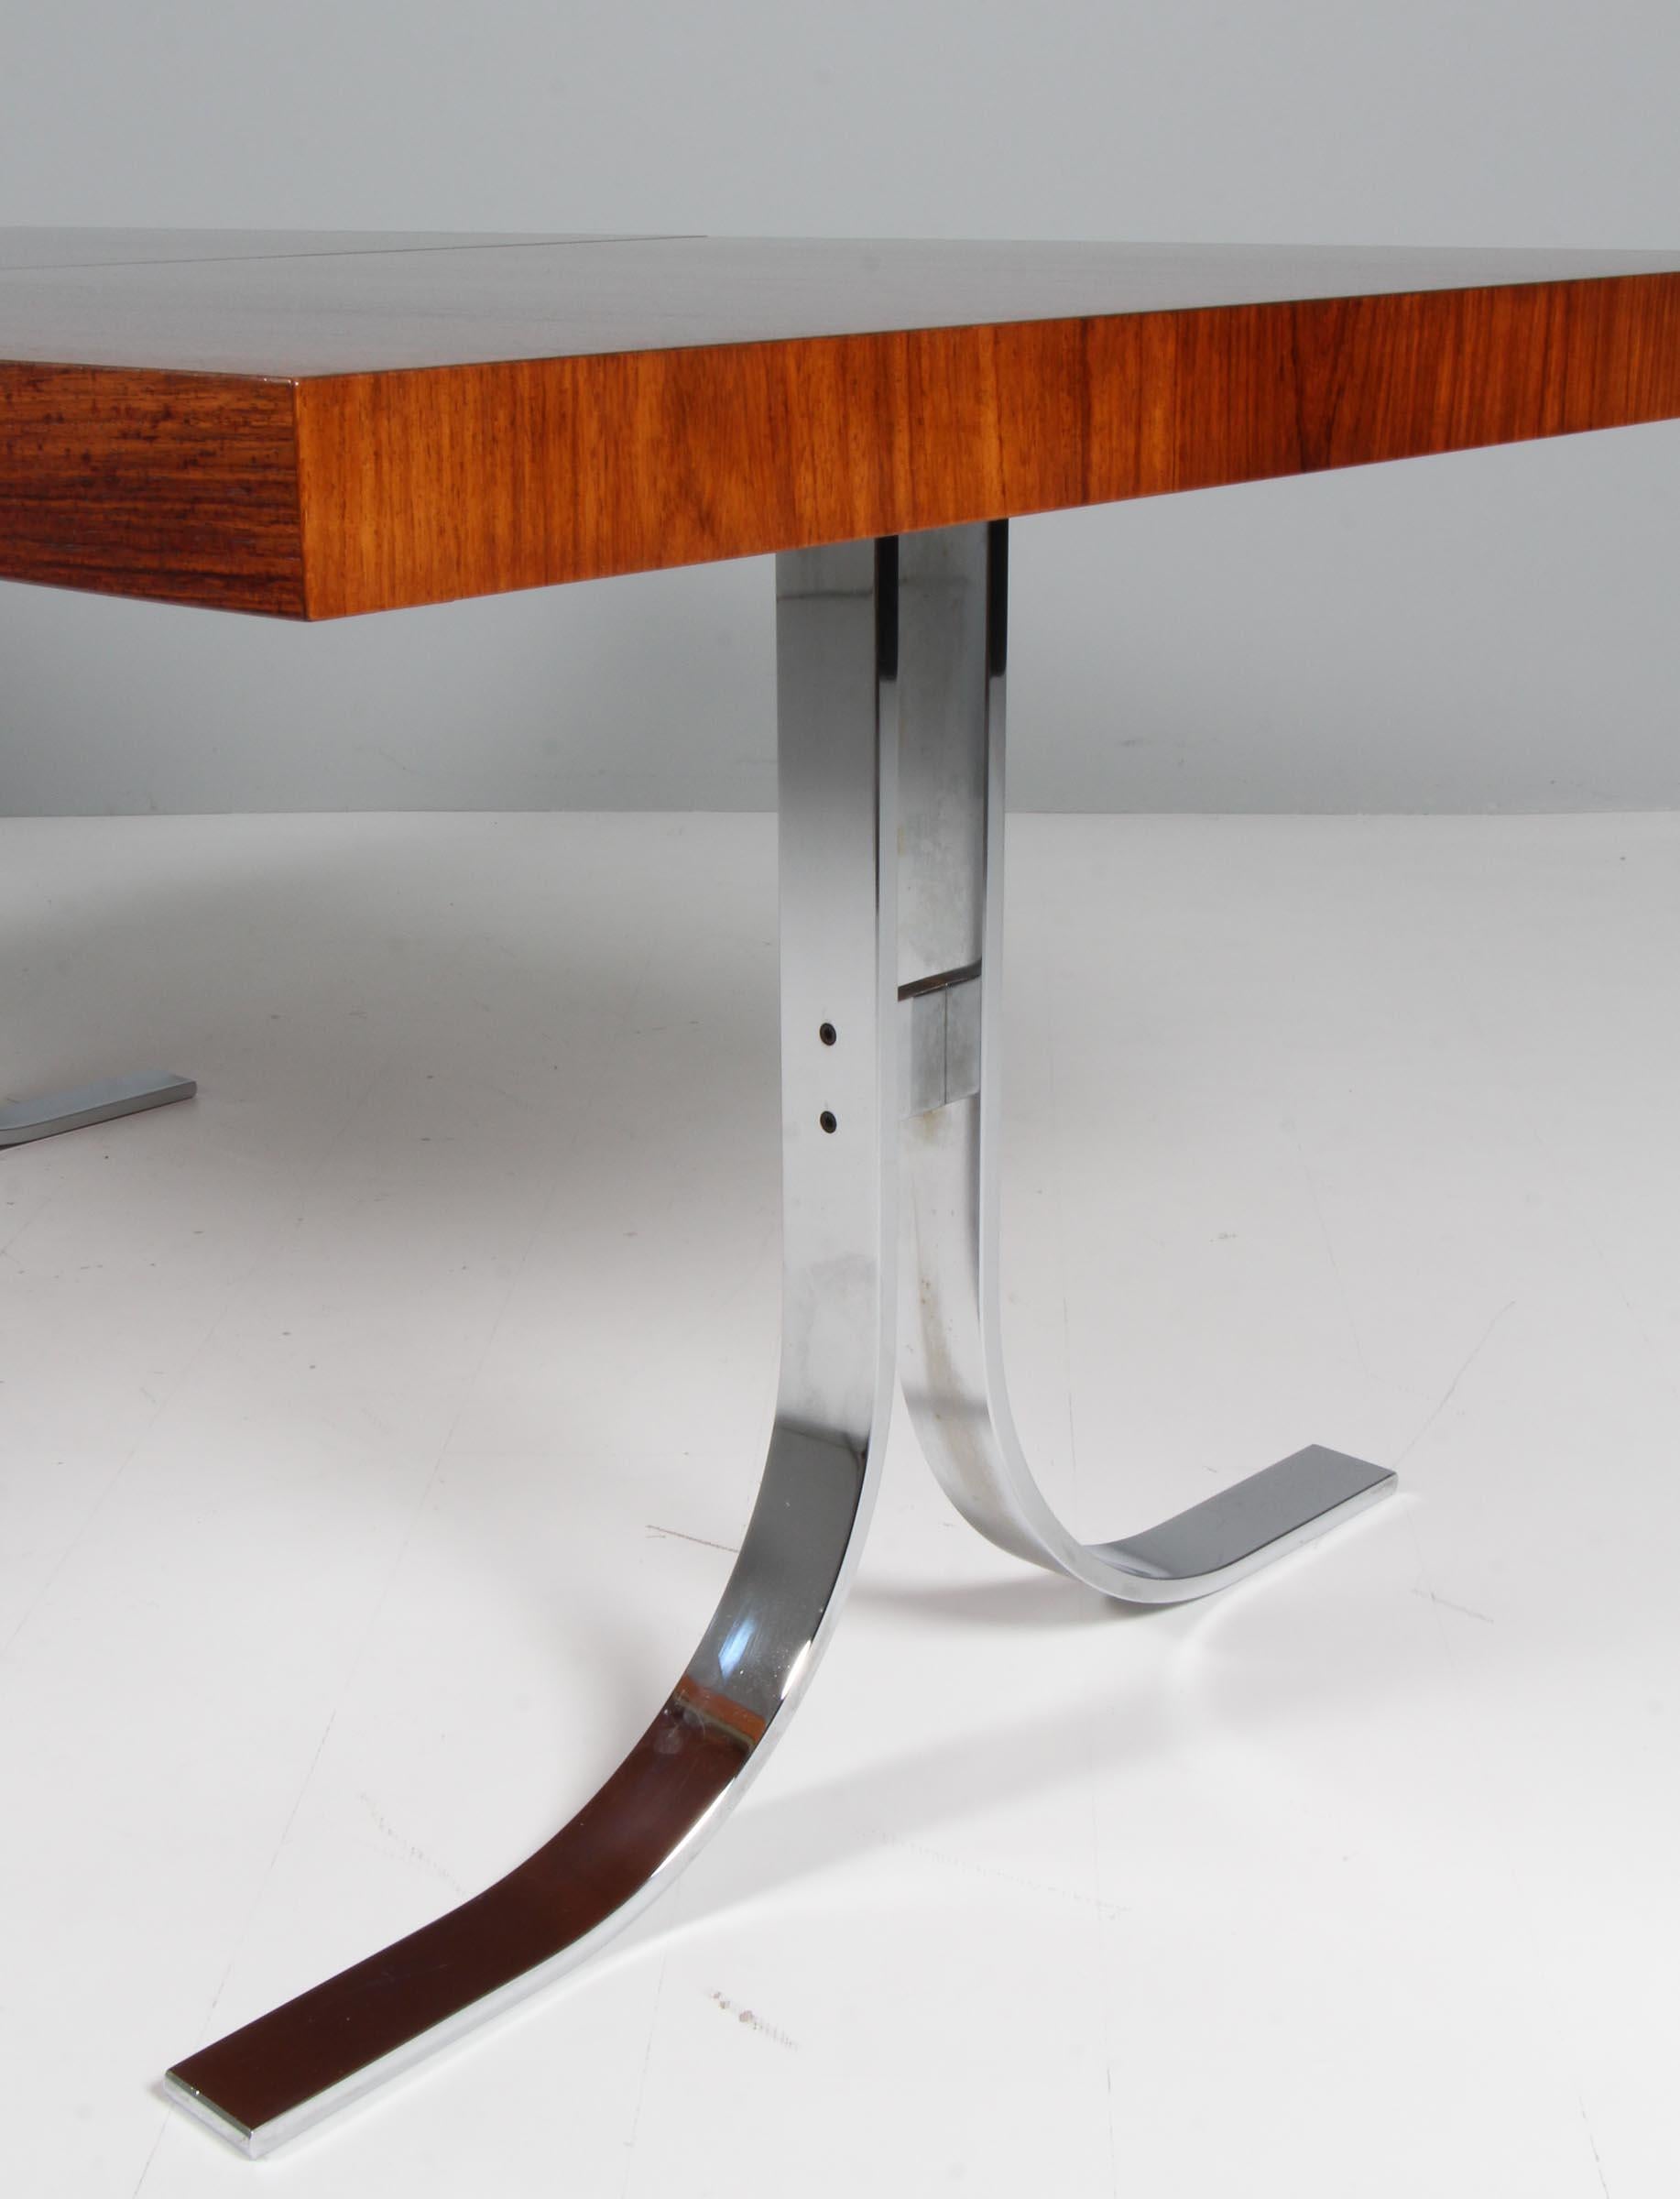 Mid-20th Century Poul Nørreklit dining table with extension leaf. Rosweood and Chromed steel